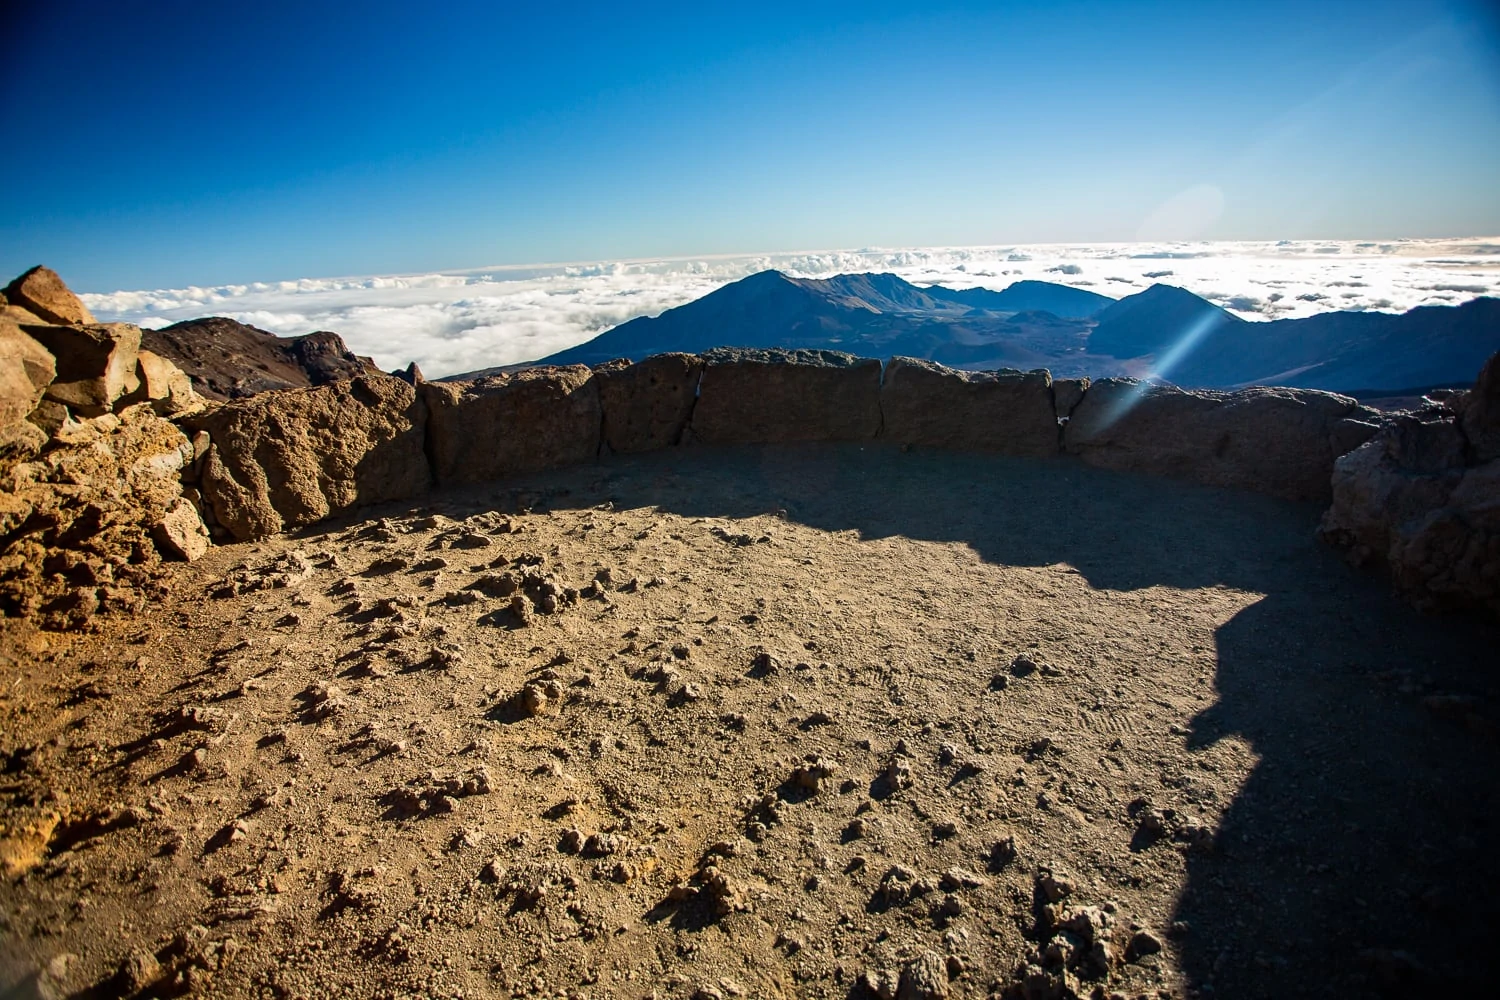 The white hill overlook at Haleakala's summit district, also known as Pa' Ka'oao, is shown here. A low stone wall separates the ceremony area from the volcano views below.